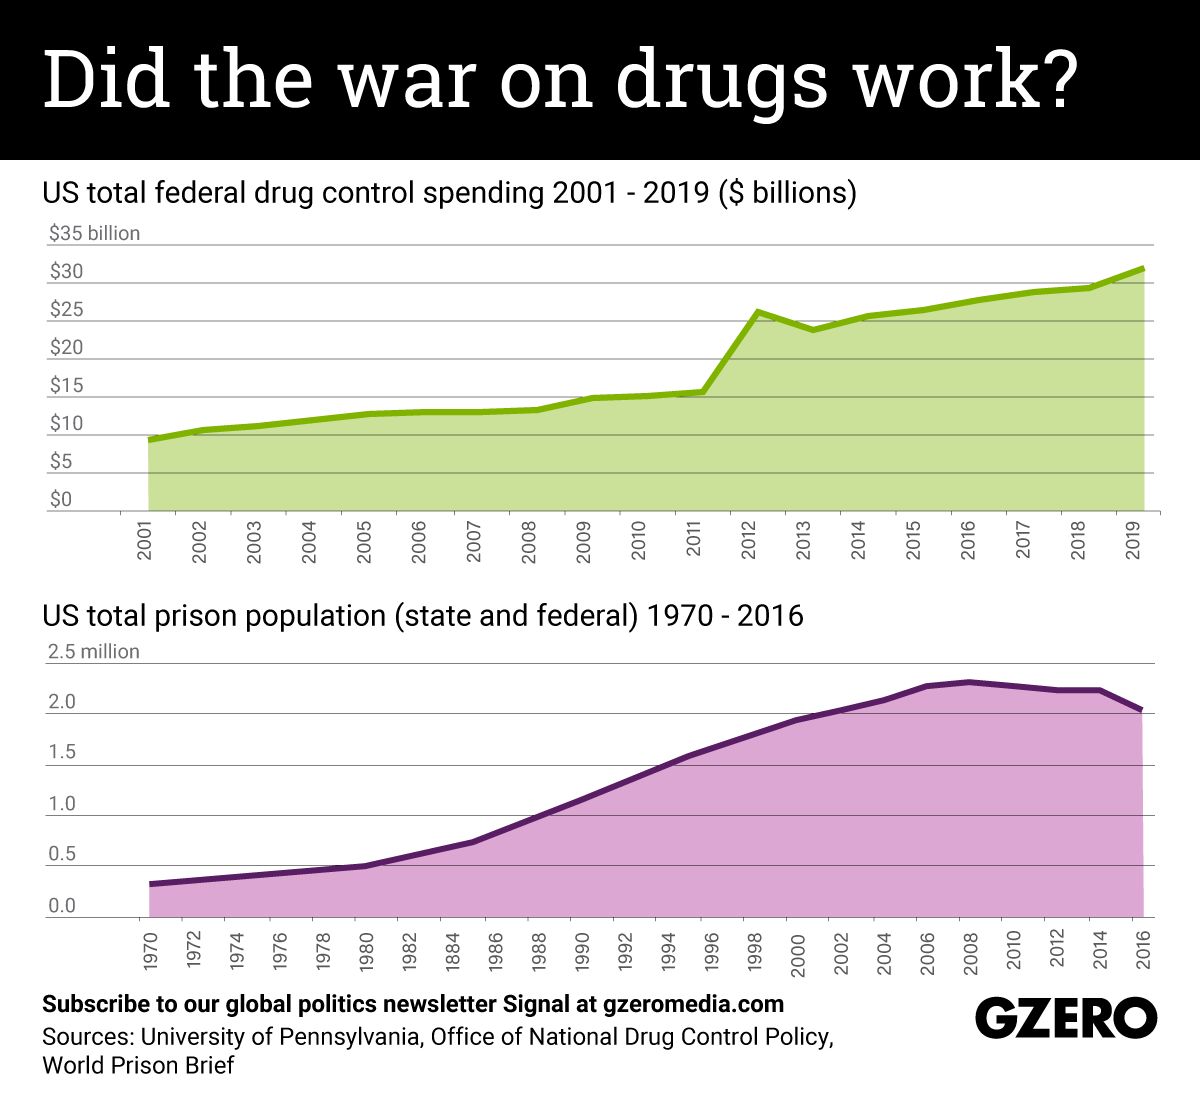 The Graphic Truth: Did the war on drugs work?